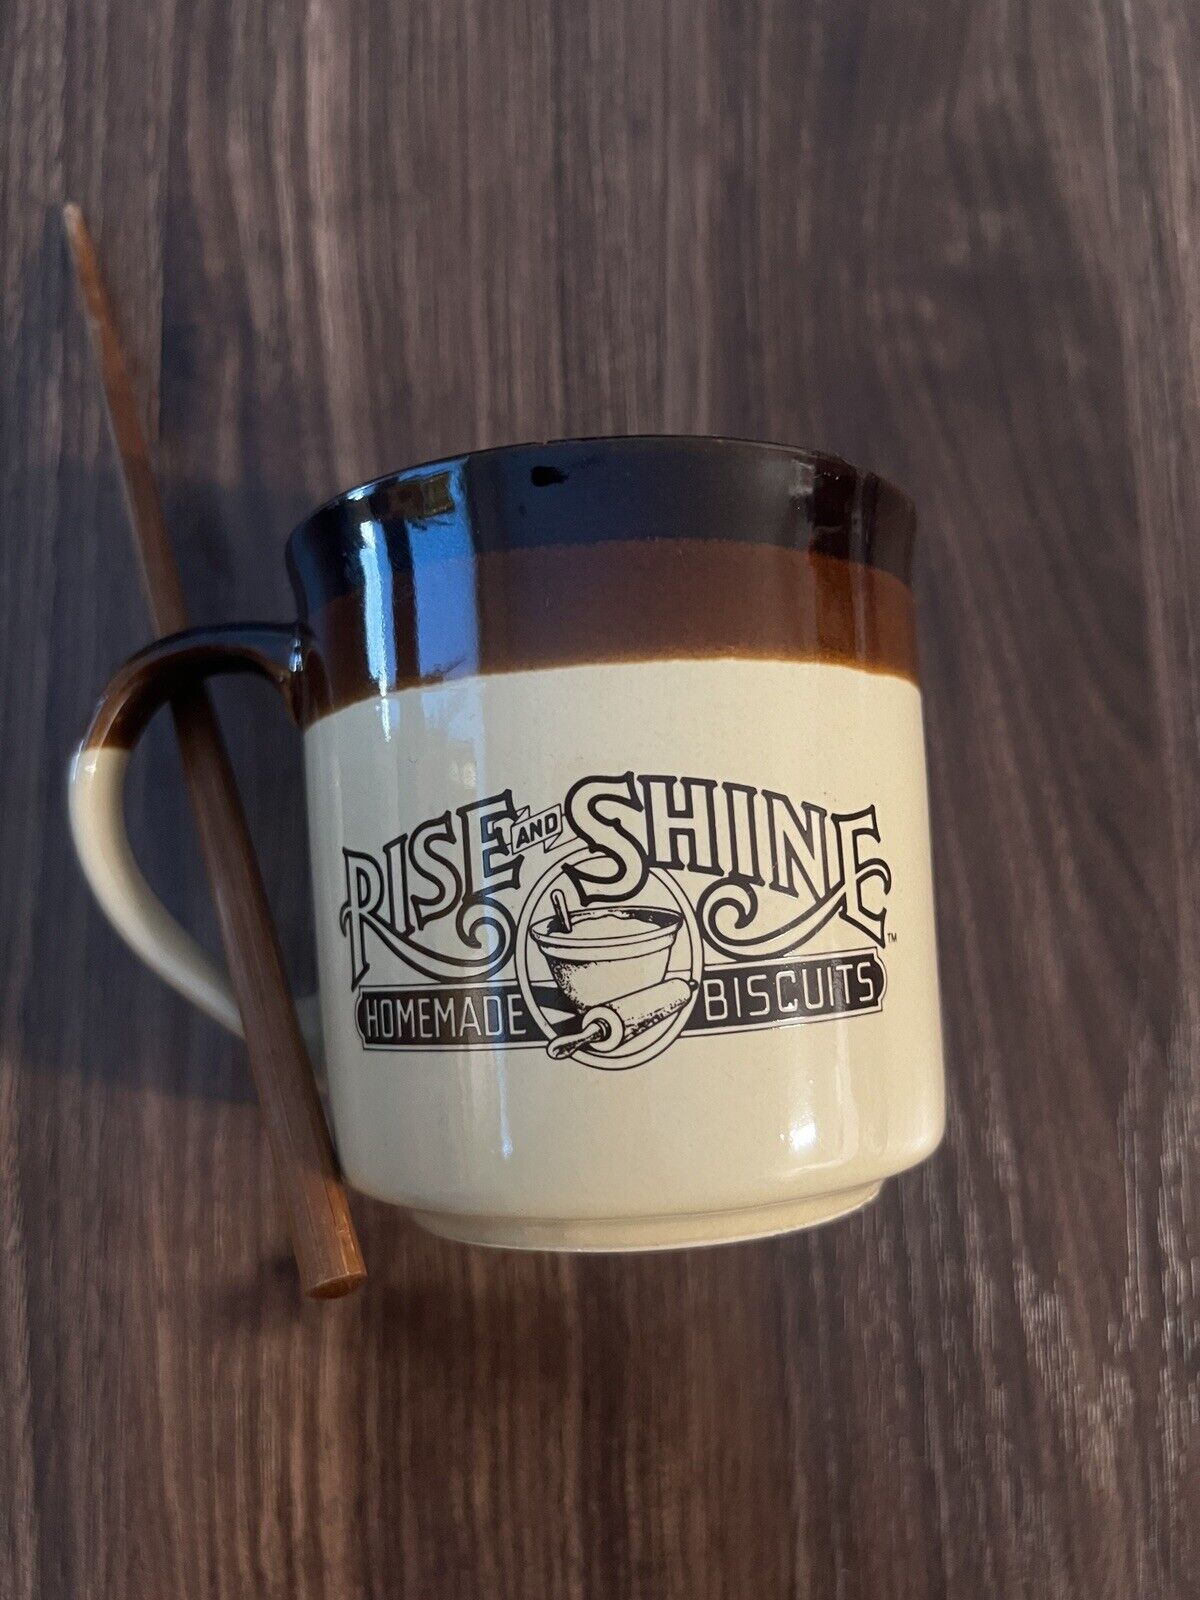 Vintage 1984 Hardees Rise And Shine Homemade Biscuits Coffee Cup Mug